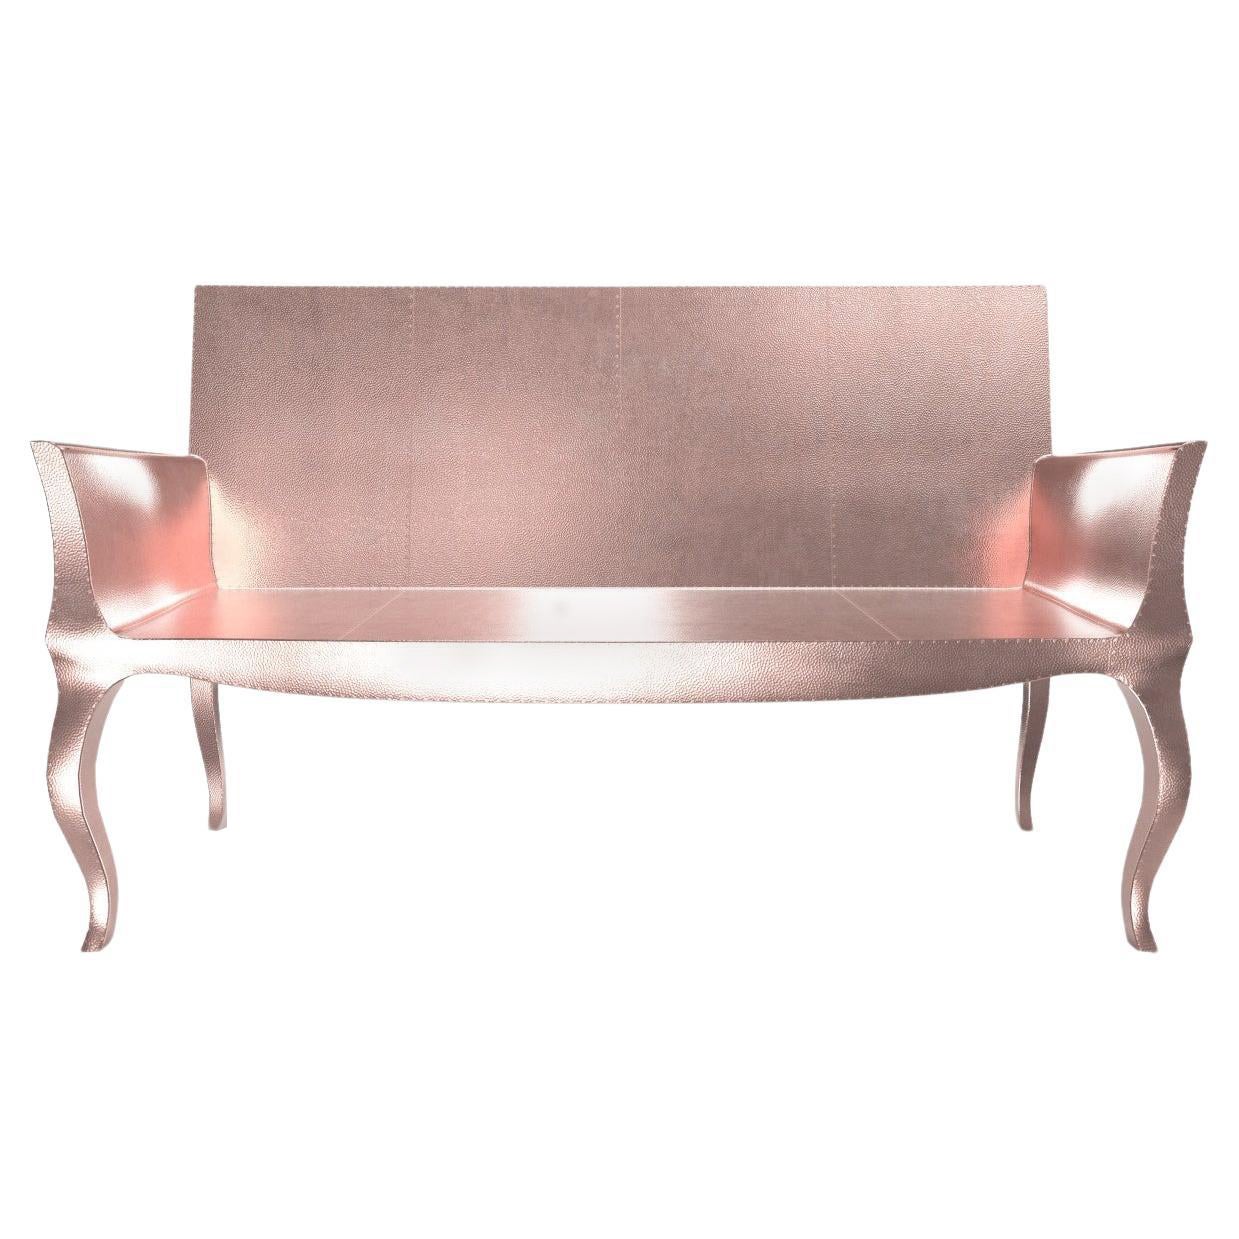 Louise Settee Art Deco Loveseats in Mid. Hammered Copper by Paul Mathieu For Sale